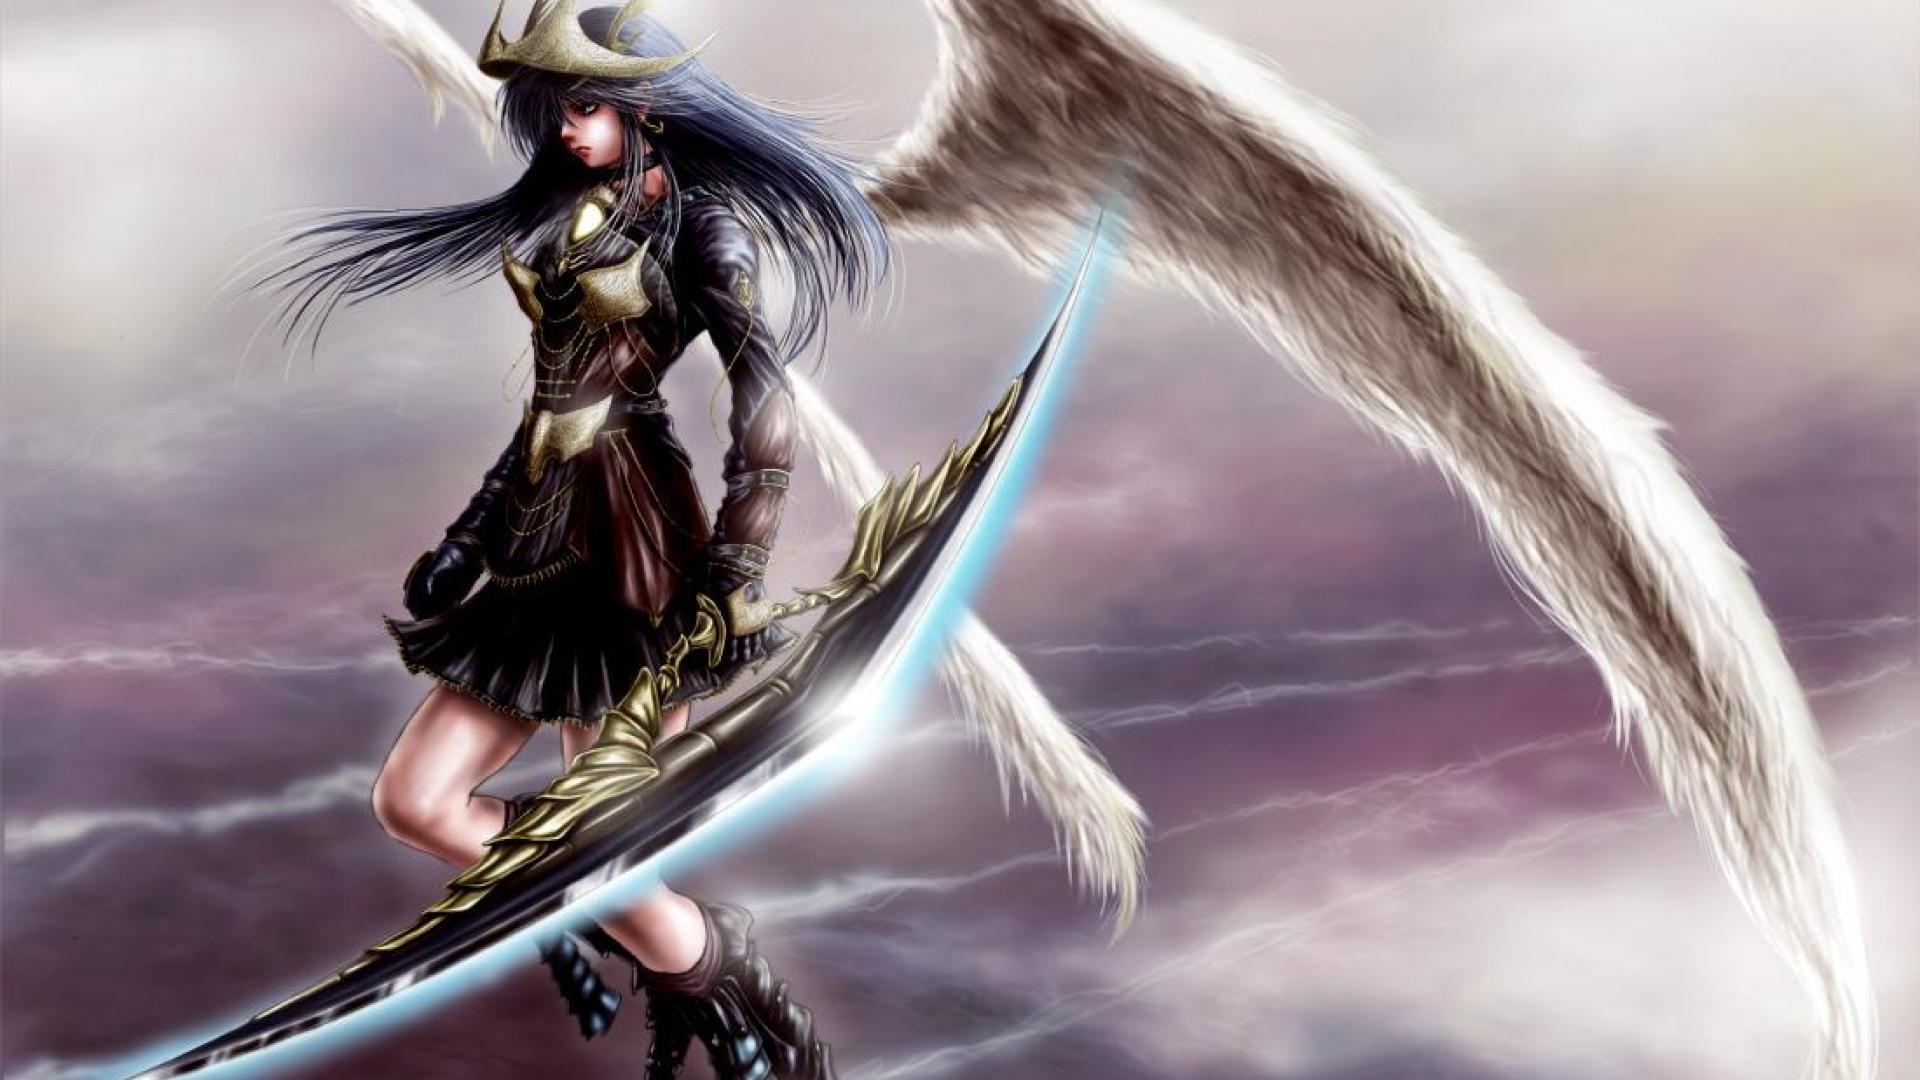 Awesome Wallpaper Anime Angel High Quality Desktop HD Background